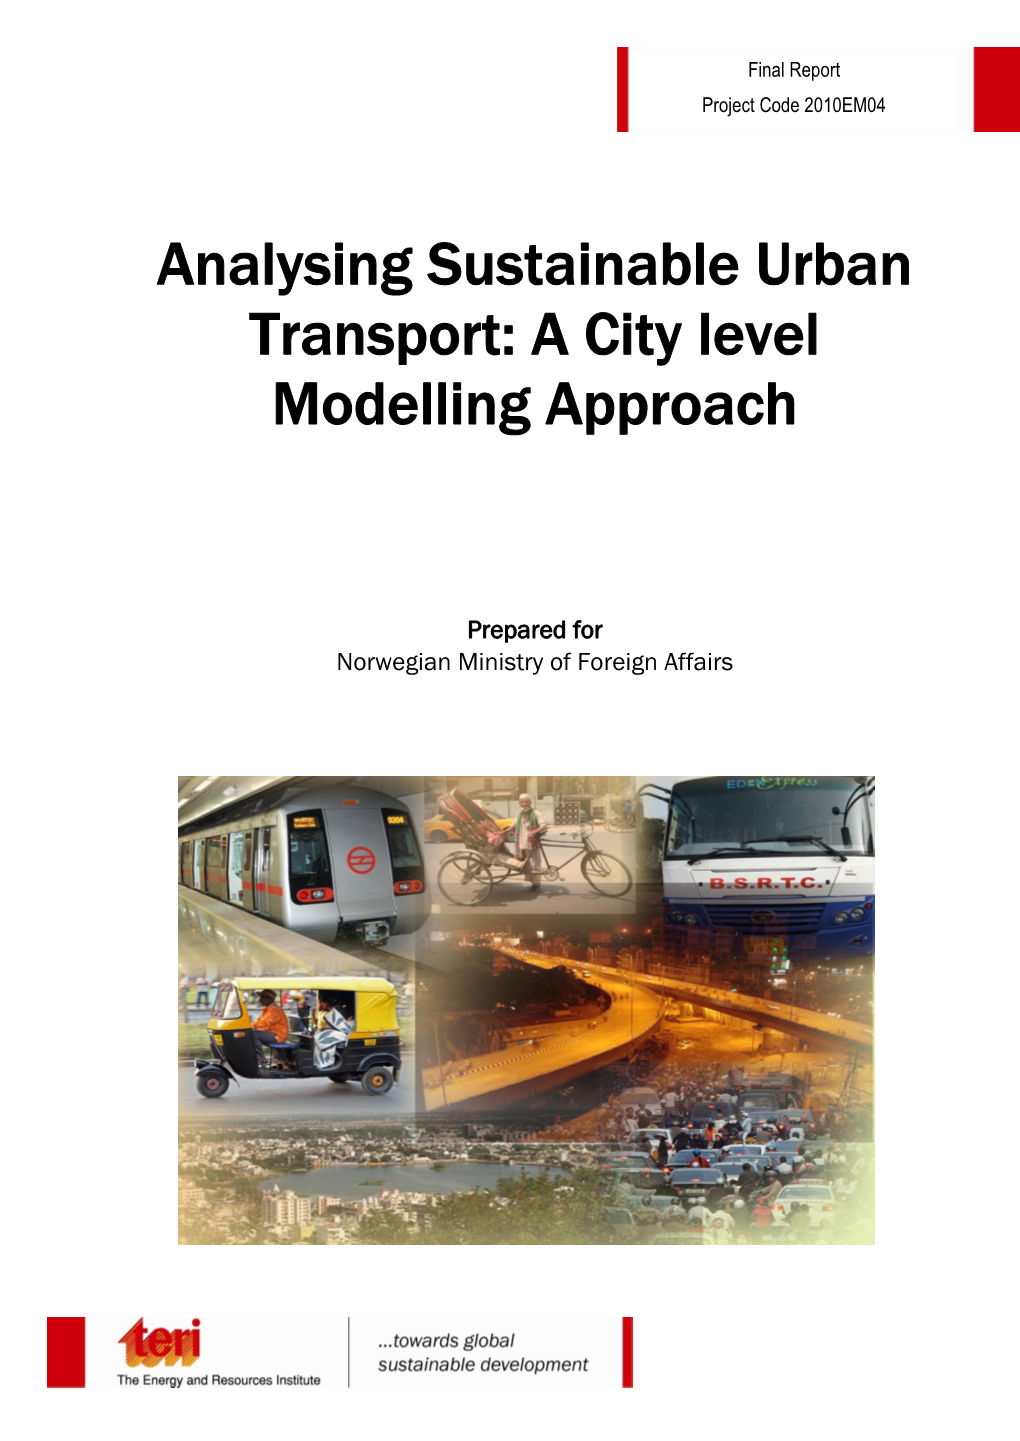 Analysing Sustainable Urban Transport: a City Level Modelling Approach